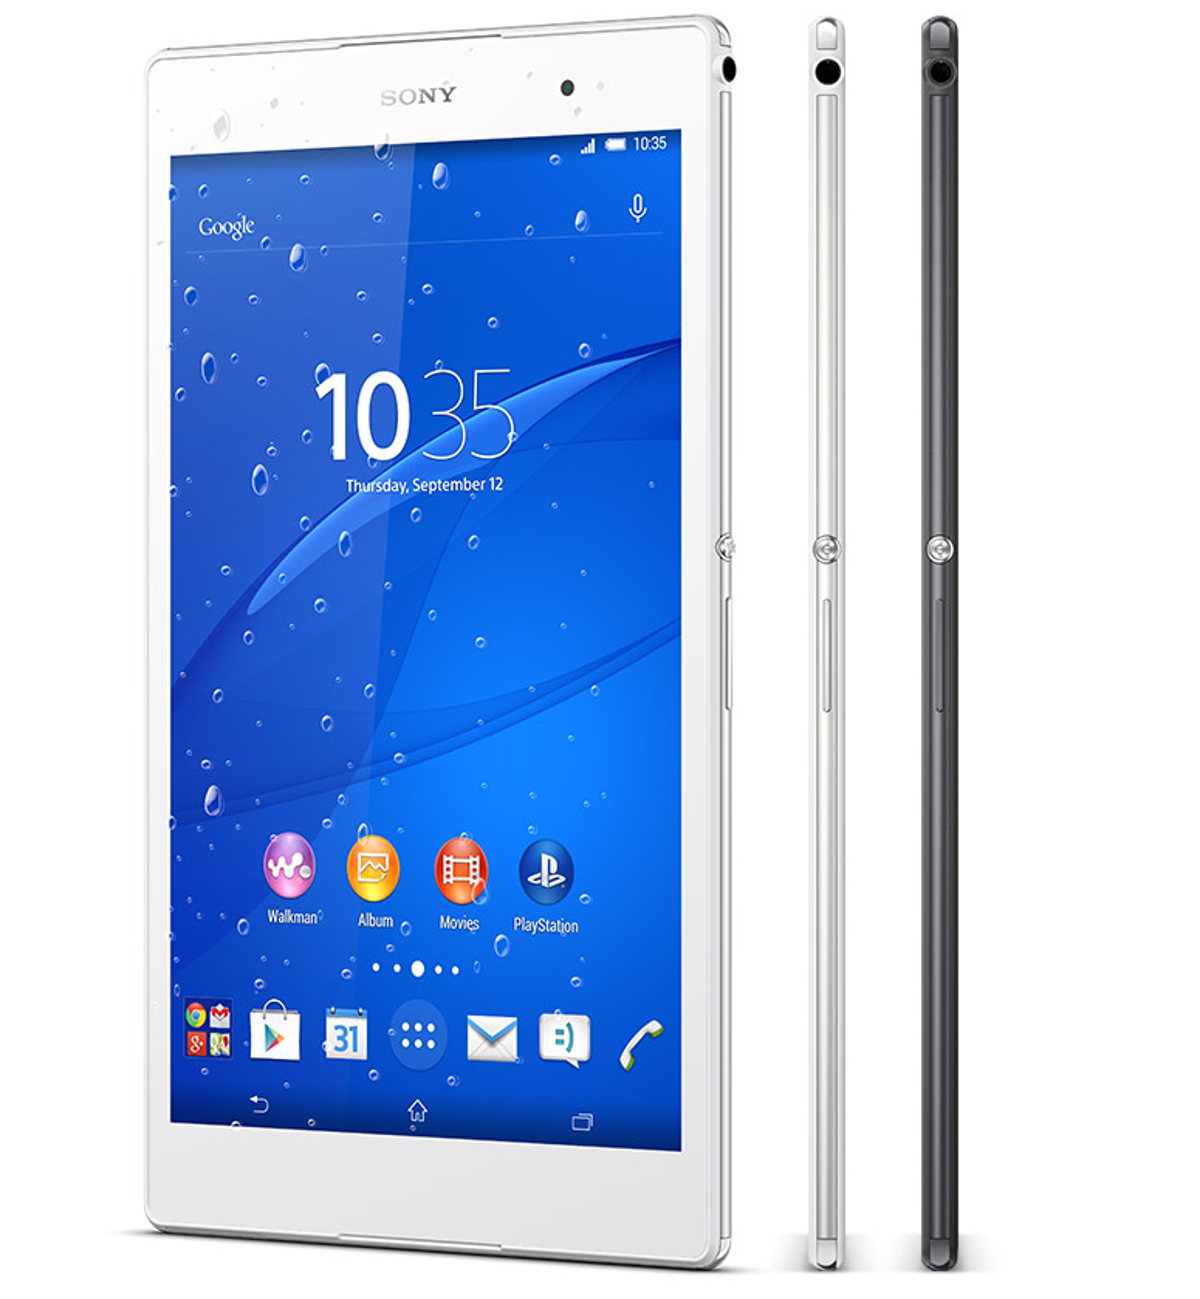 Xperia Z3 Tablet Compact gets Android Marshmallow (23.5.A.0.570